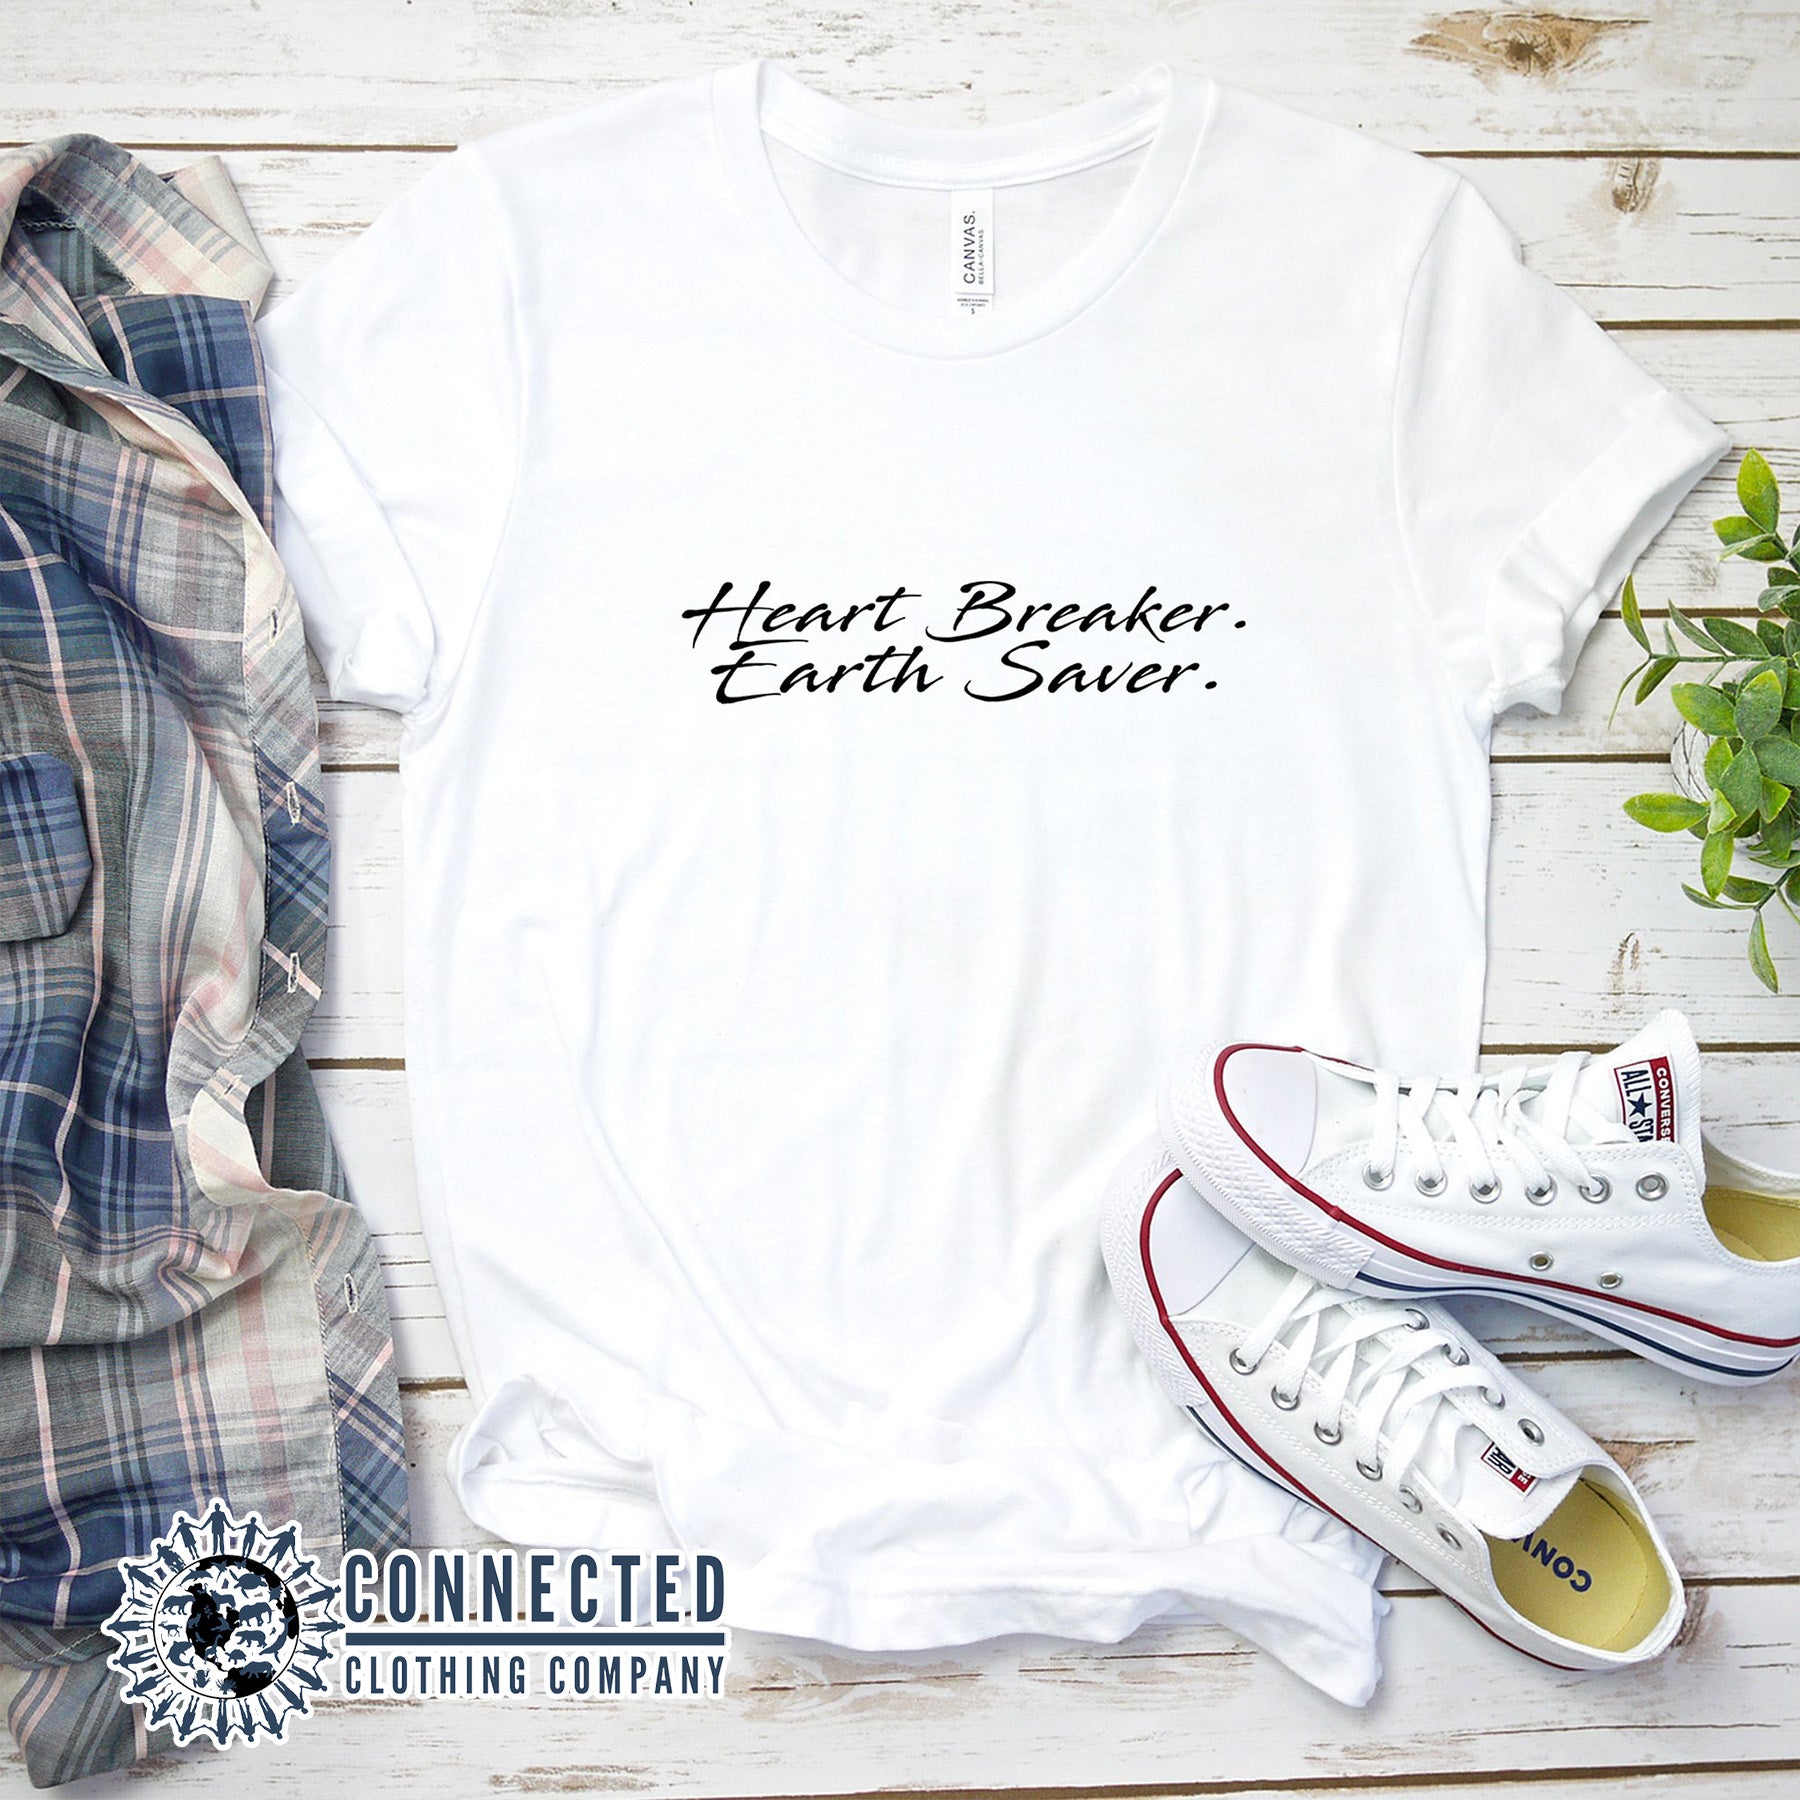 White Heart Breaker. Earth Saver. Short-Sleeve Tee - sweetsherriloudesigns - Ethically and Sustainably Made - 10% of profits donated to ocean conservation